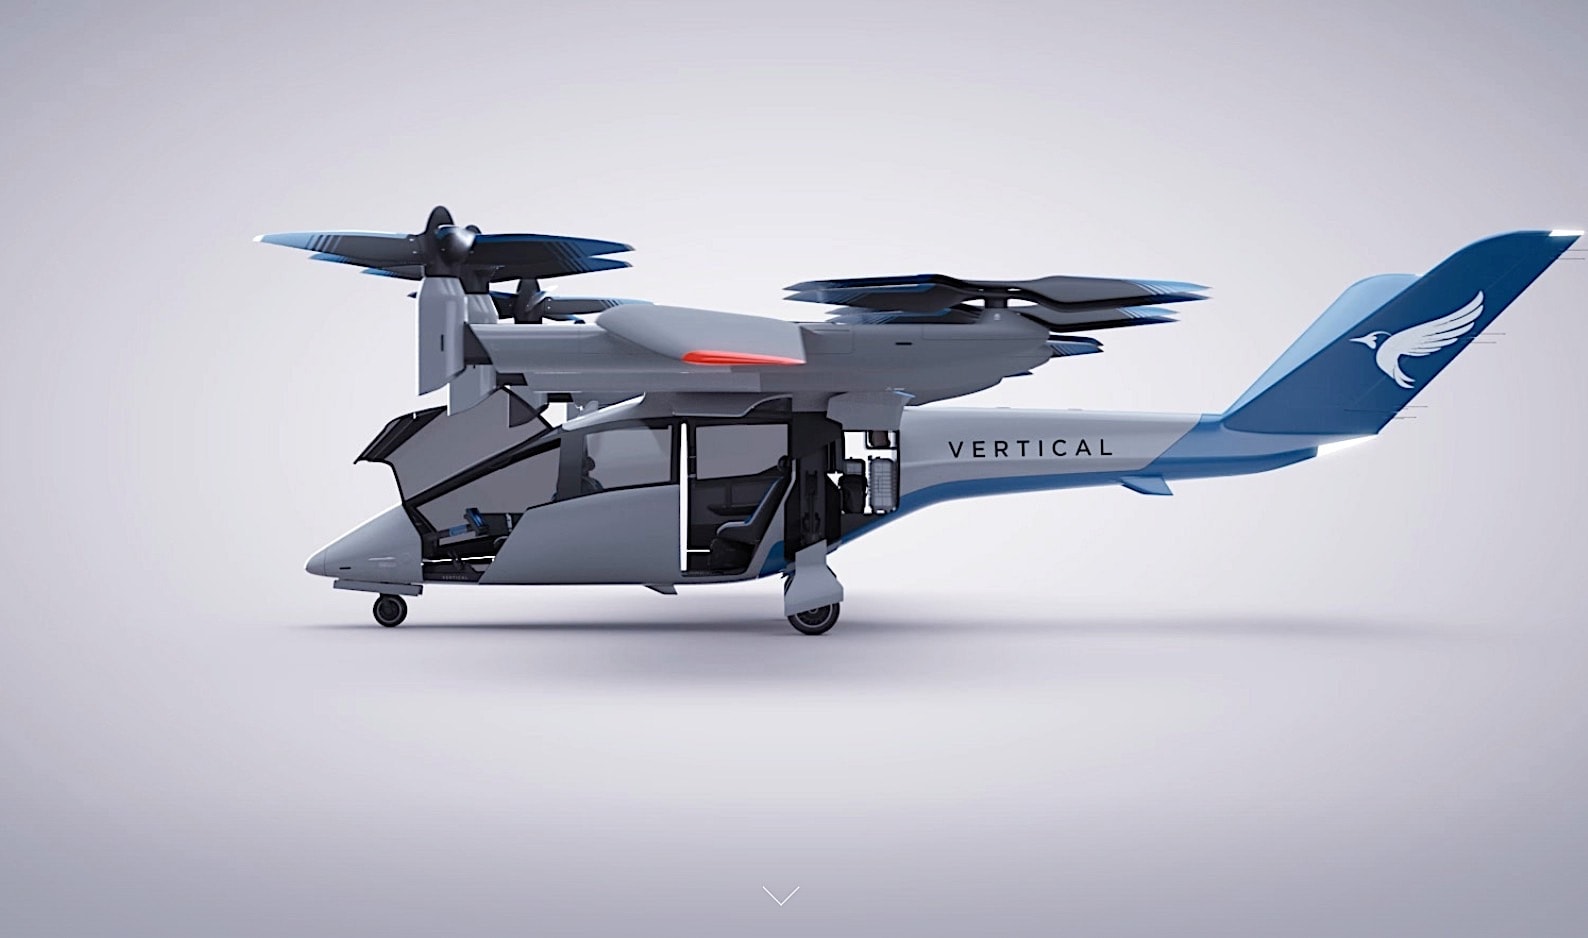 RollsRoyce Gets Into the eVTOL Game, Will Power Vertical Aerospace